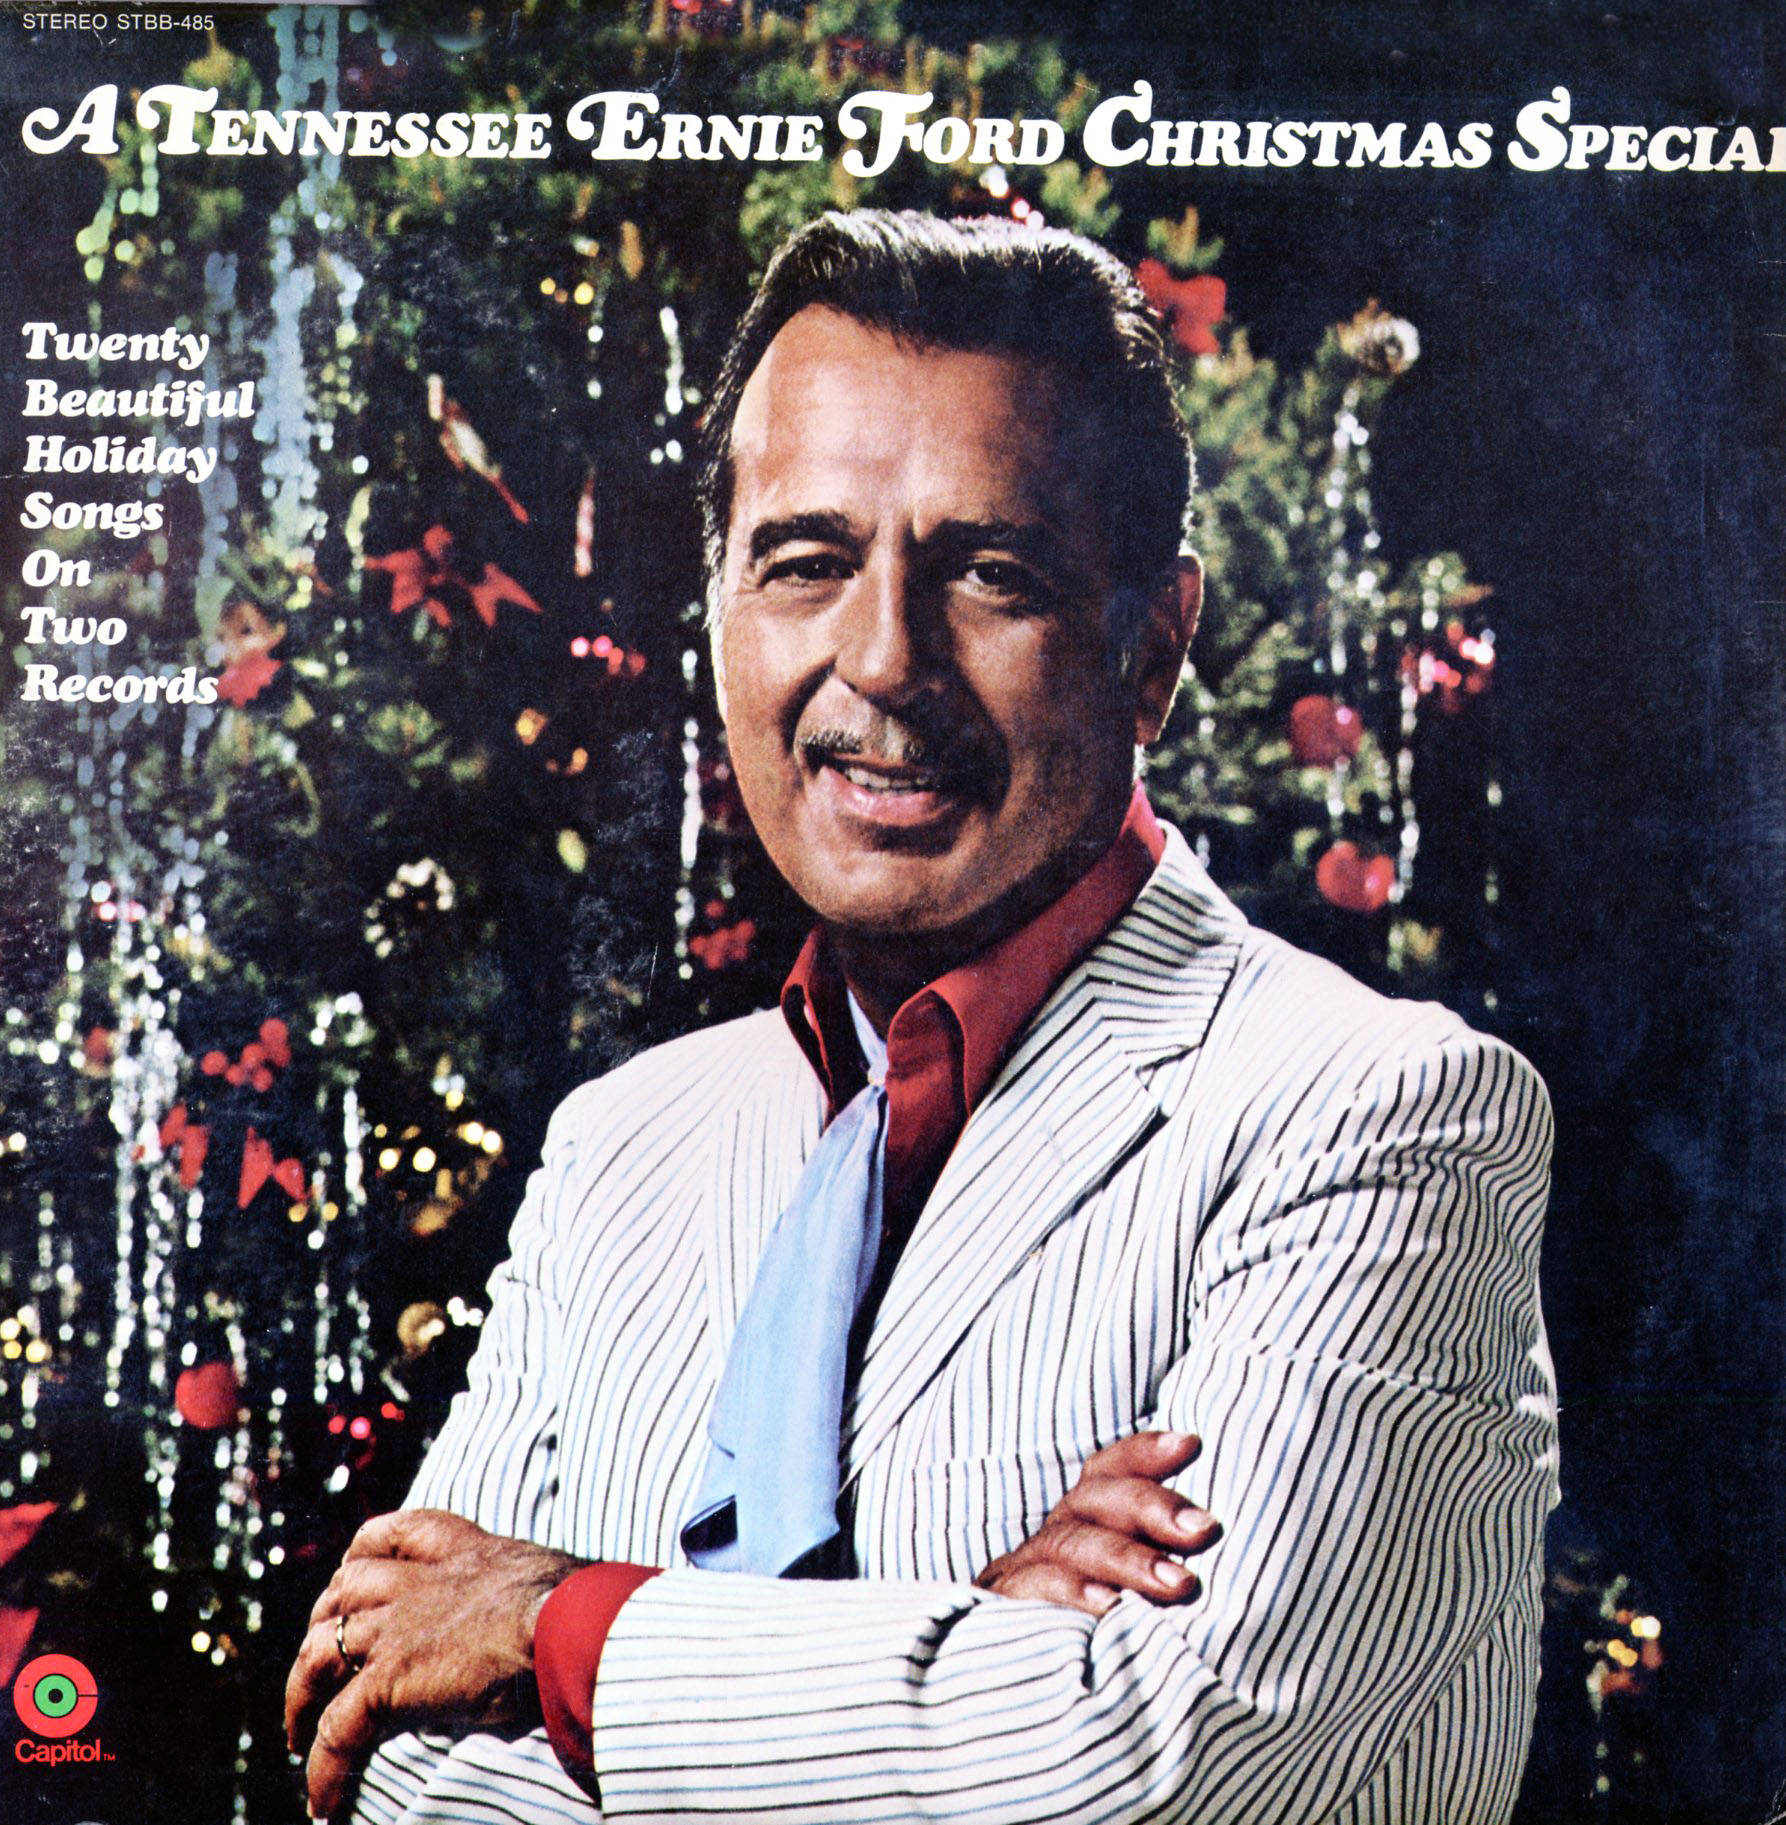 American Singer Tennessee Ernie Ford Christmas Special Album Wallpaper